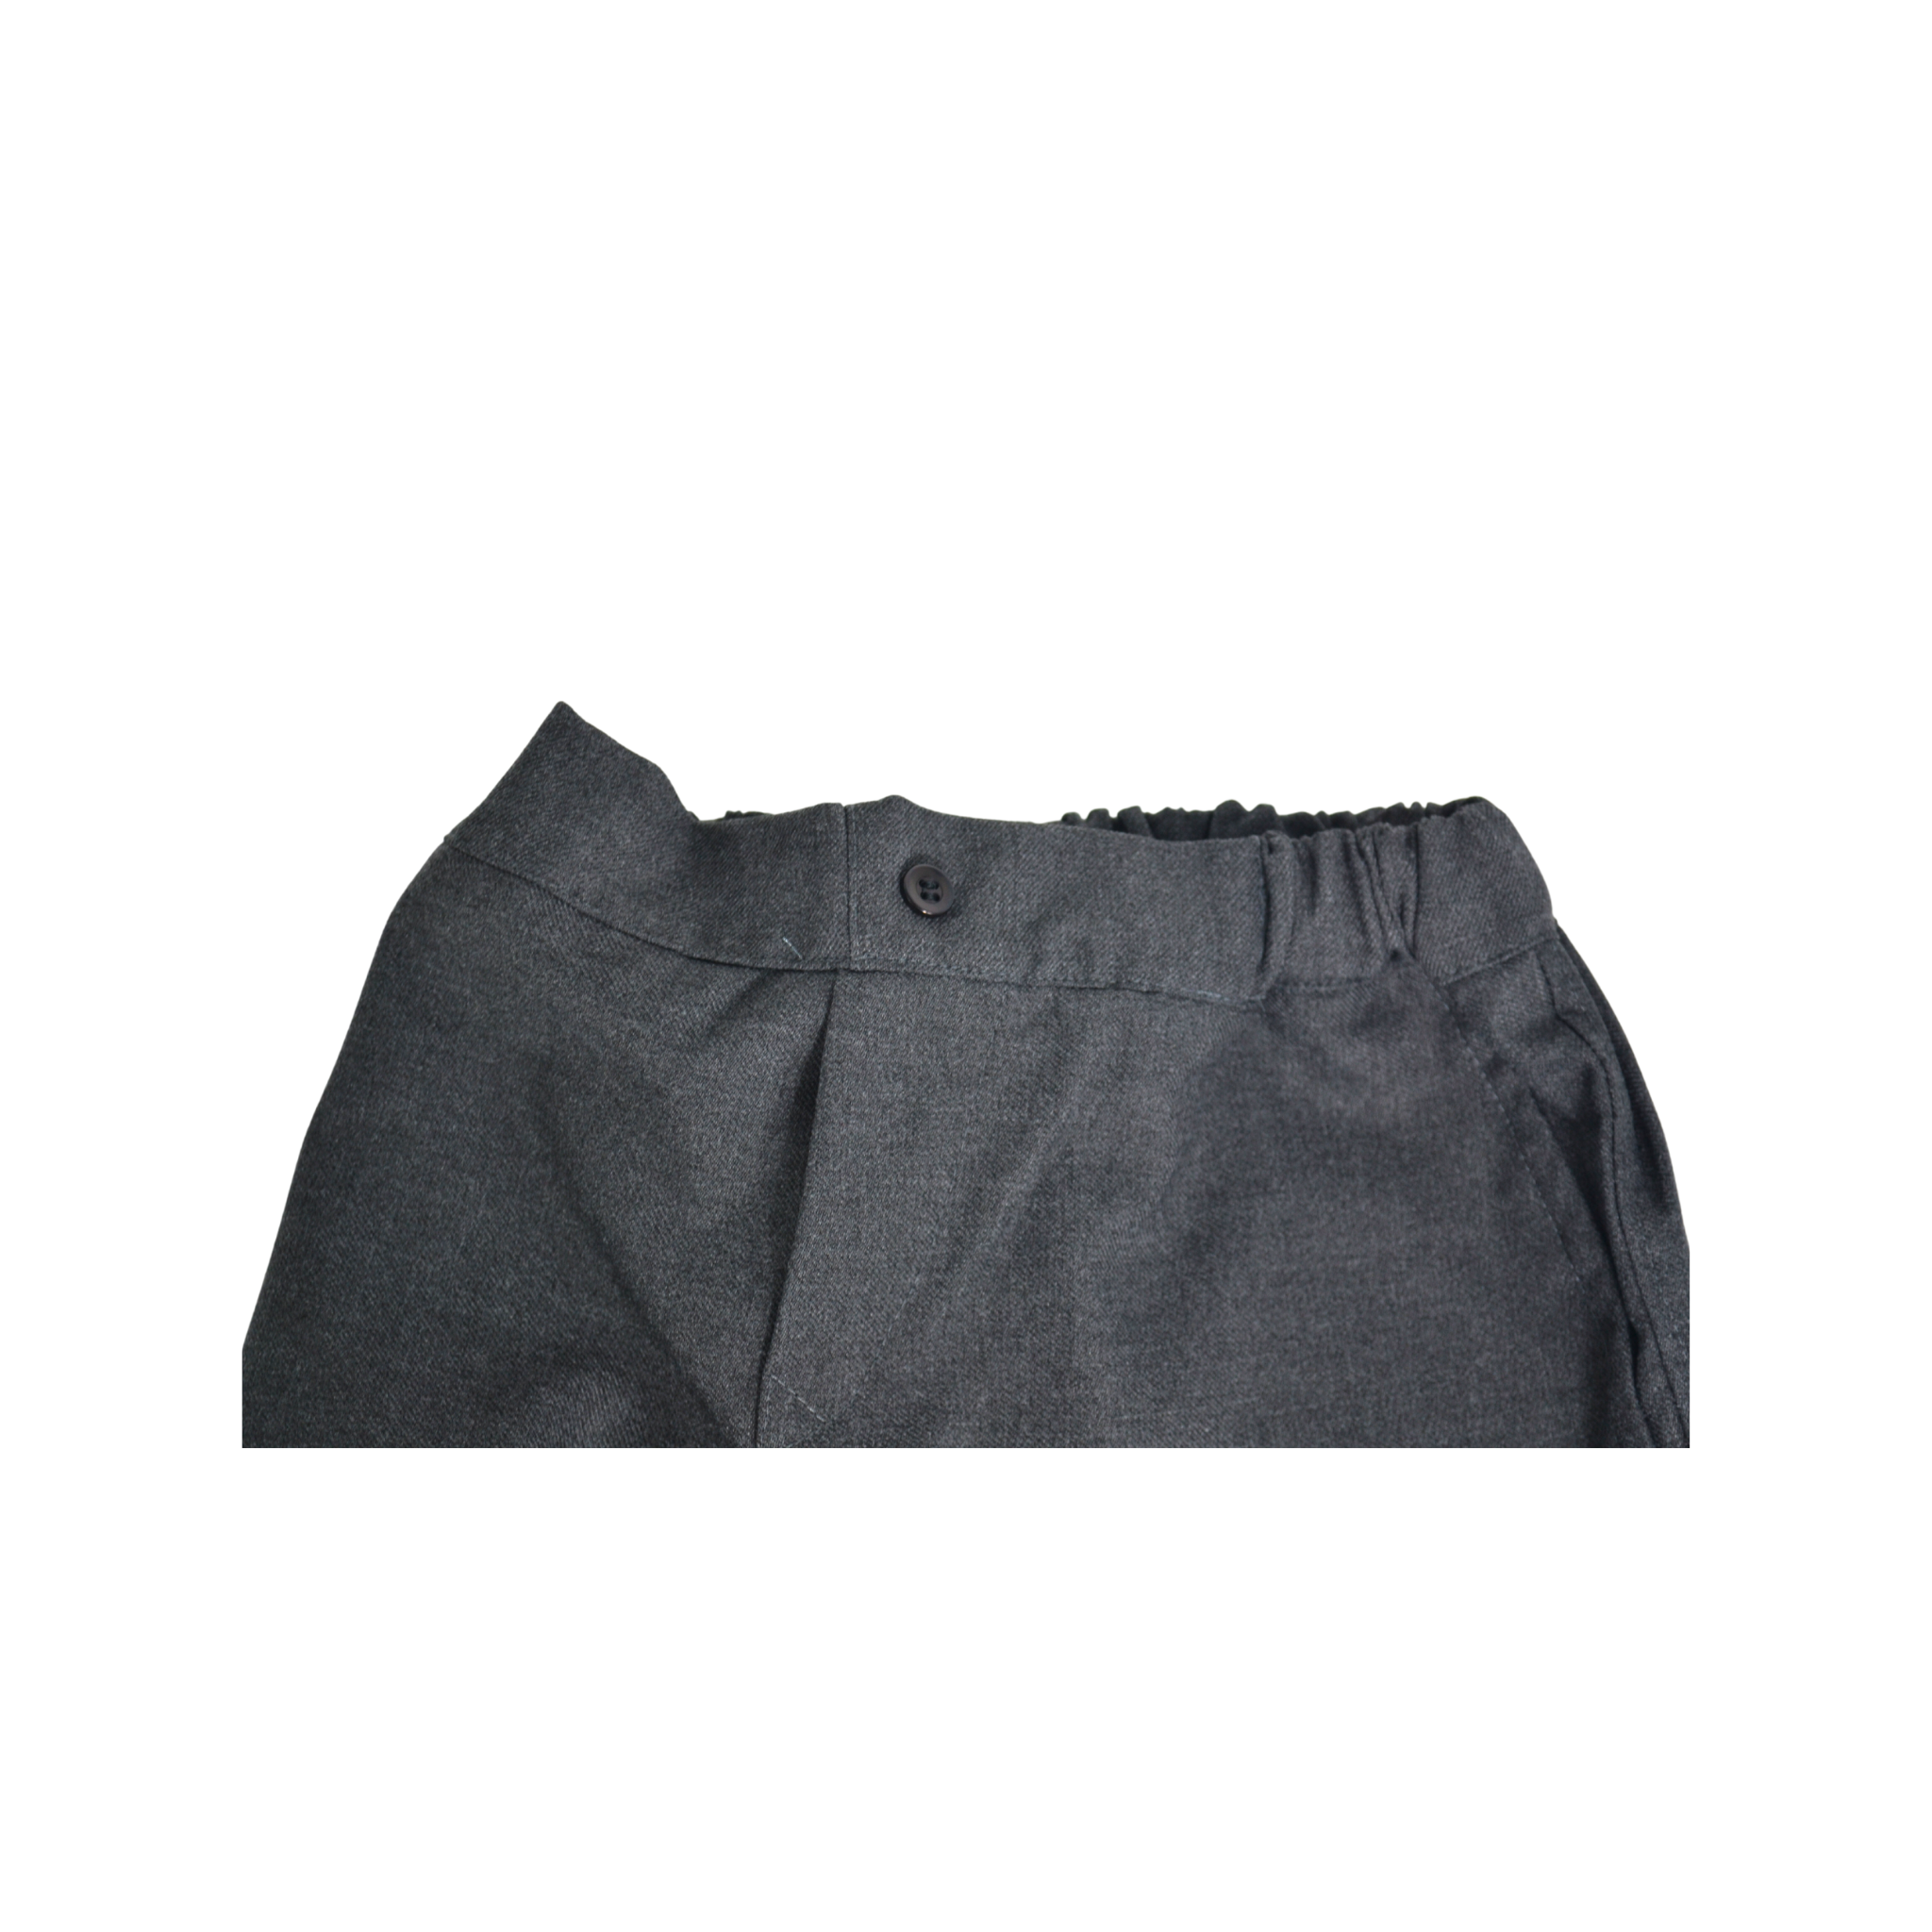 Spectra Sensory Clothing - Autism Friendly Charcoal Grey School Trousers